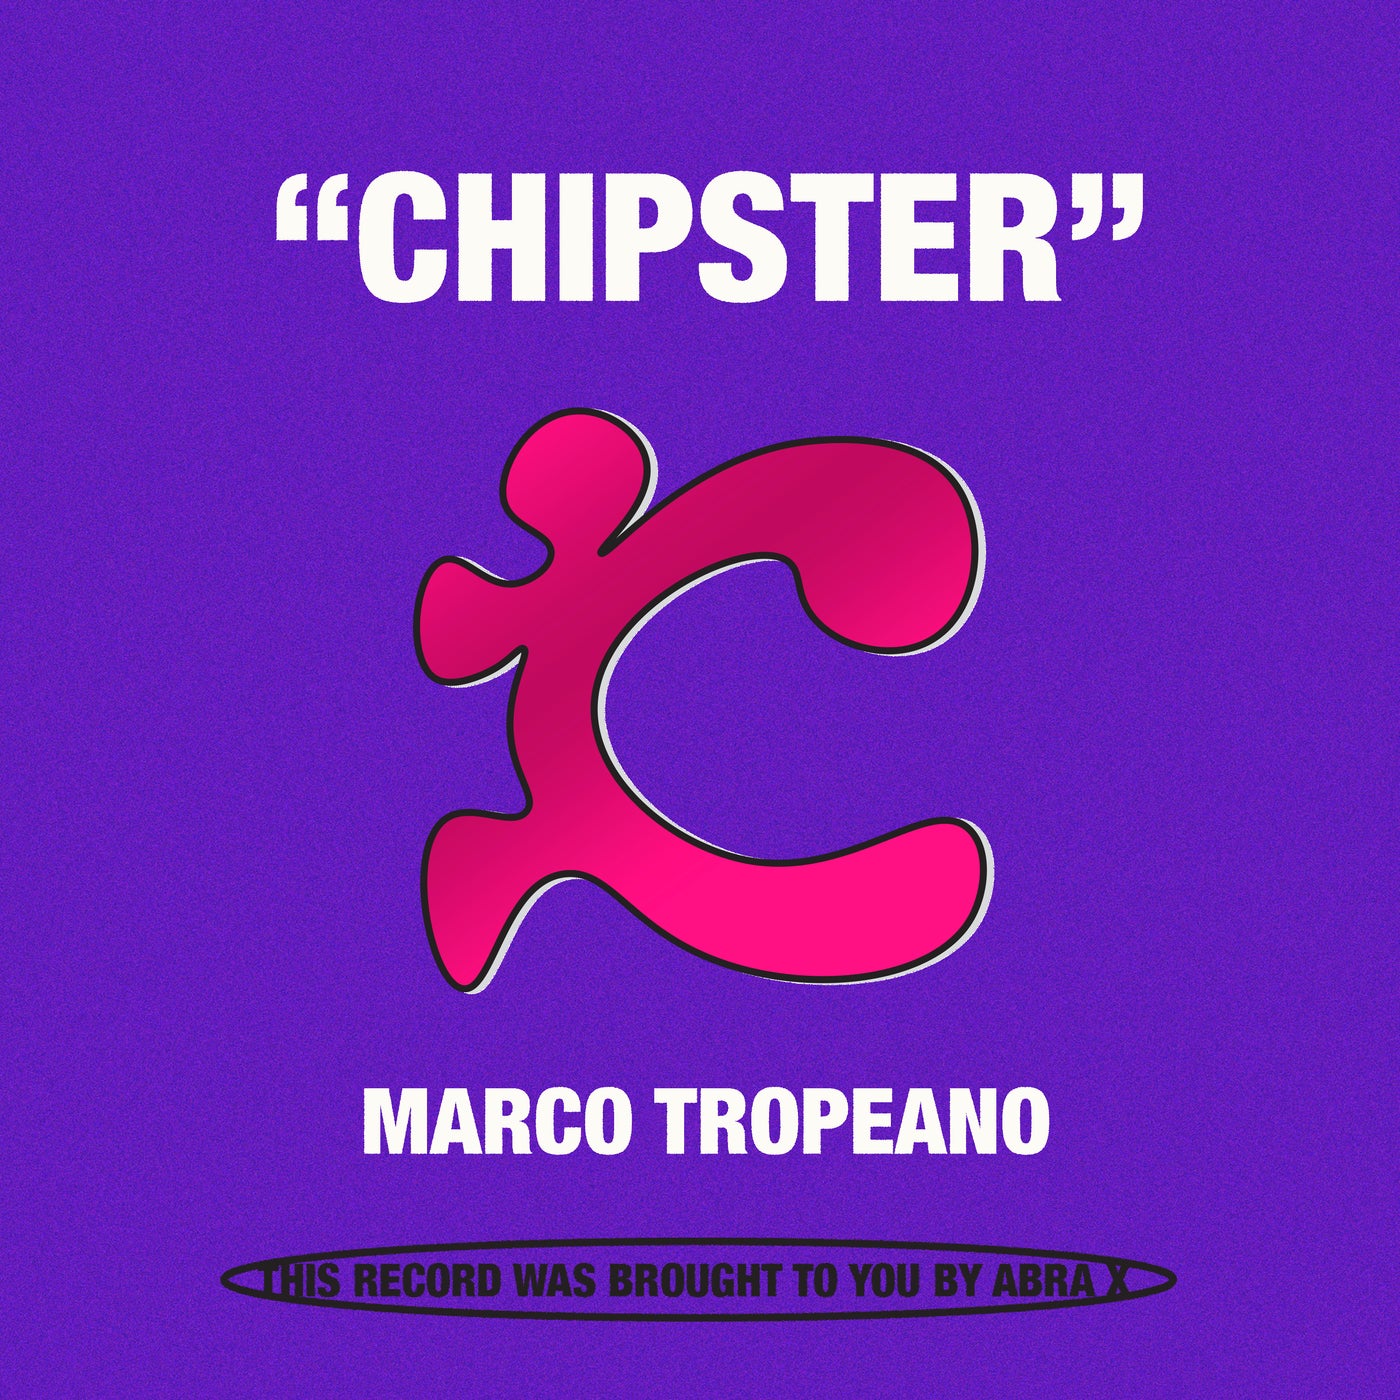 Chipster